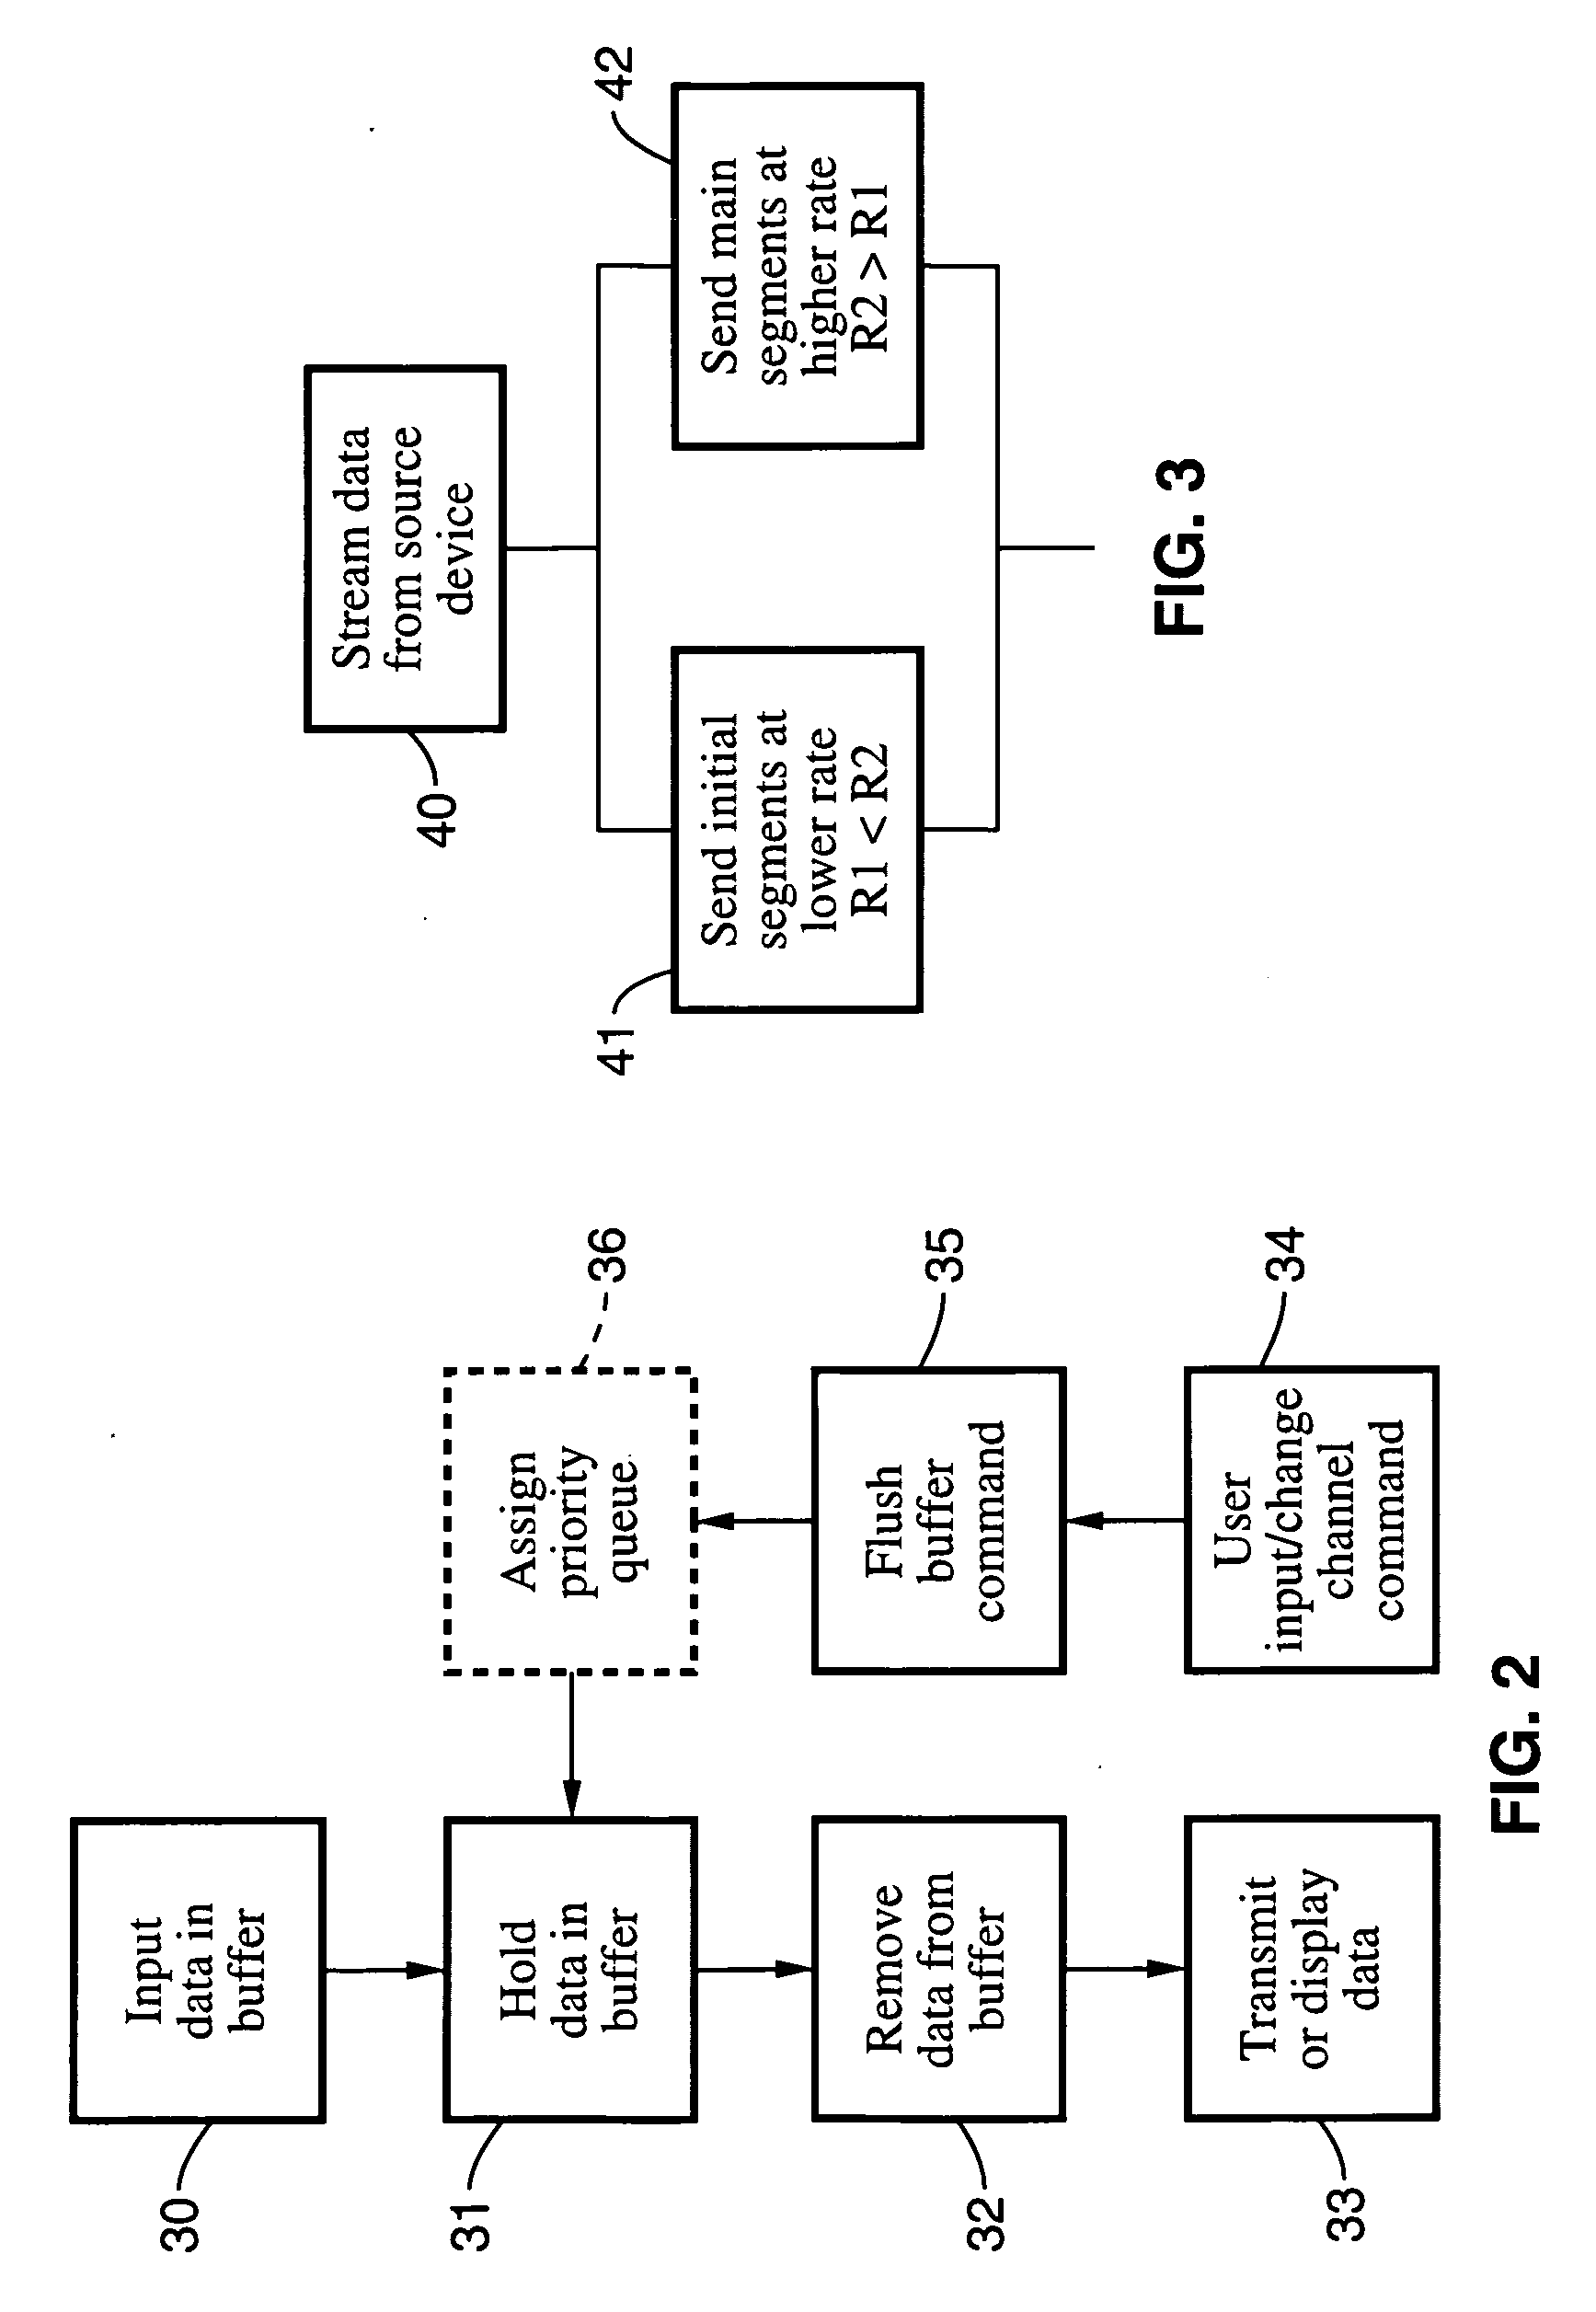 Methods and apparatus for decreasing streaming latencies for IPTV